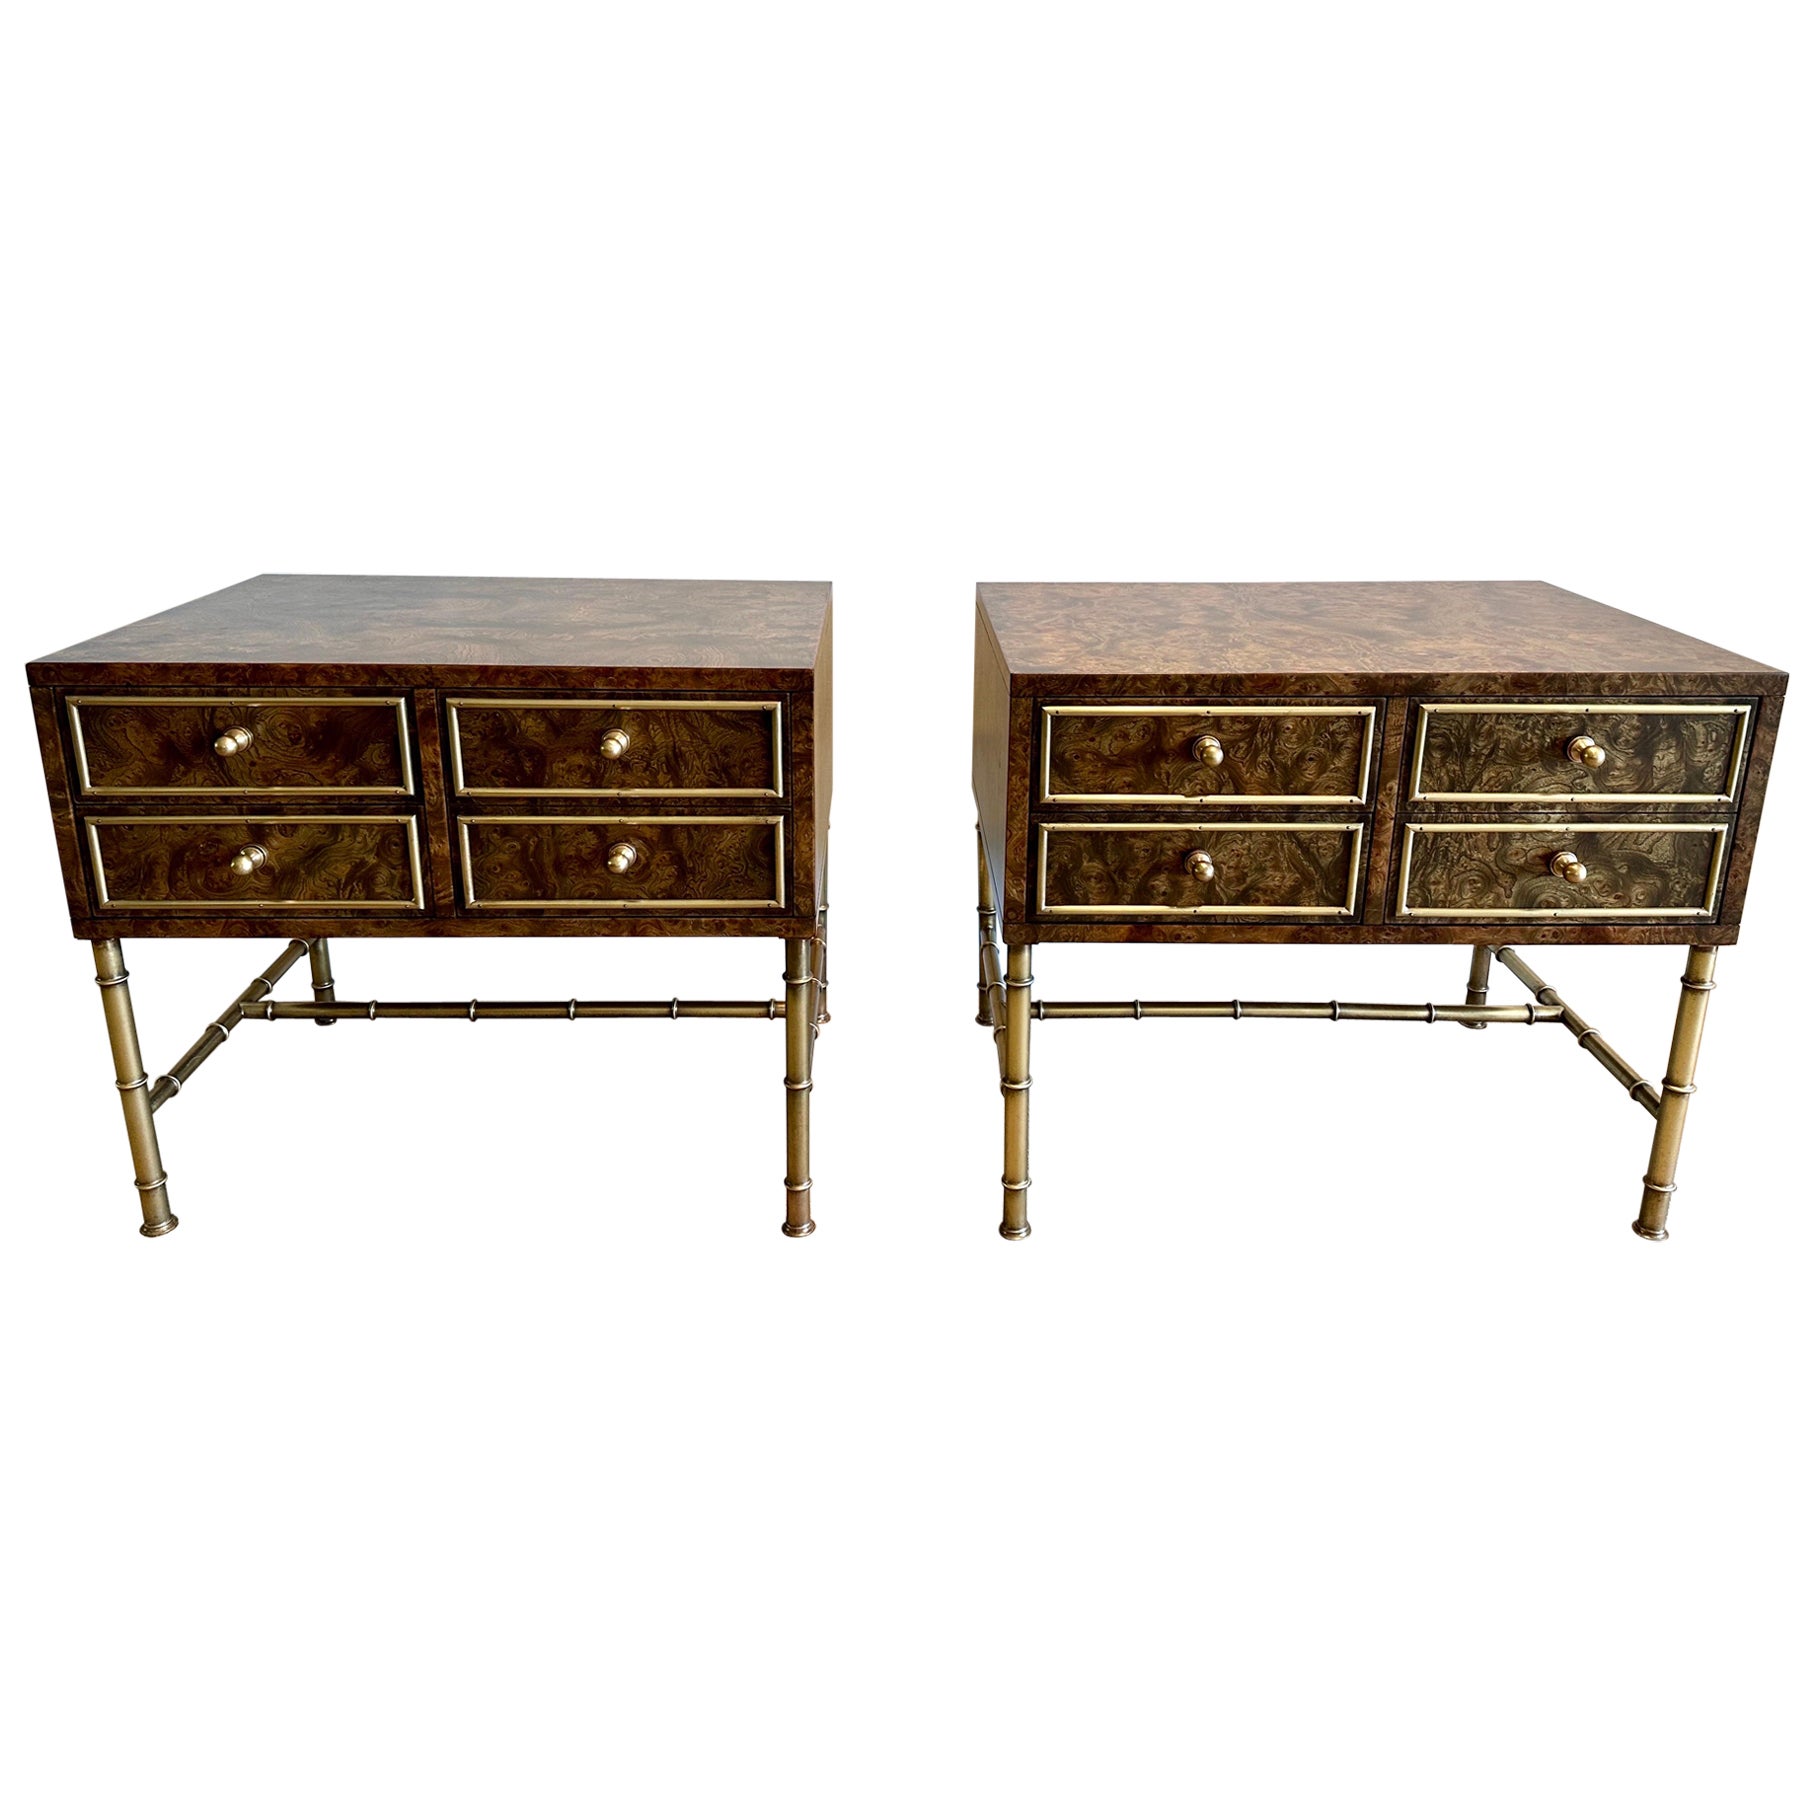 Pair of Vintage Burlwood and Brass Night Tables by Mastercraft For Sale